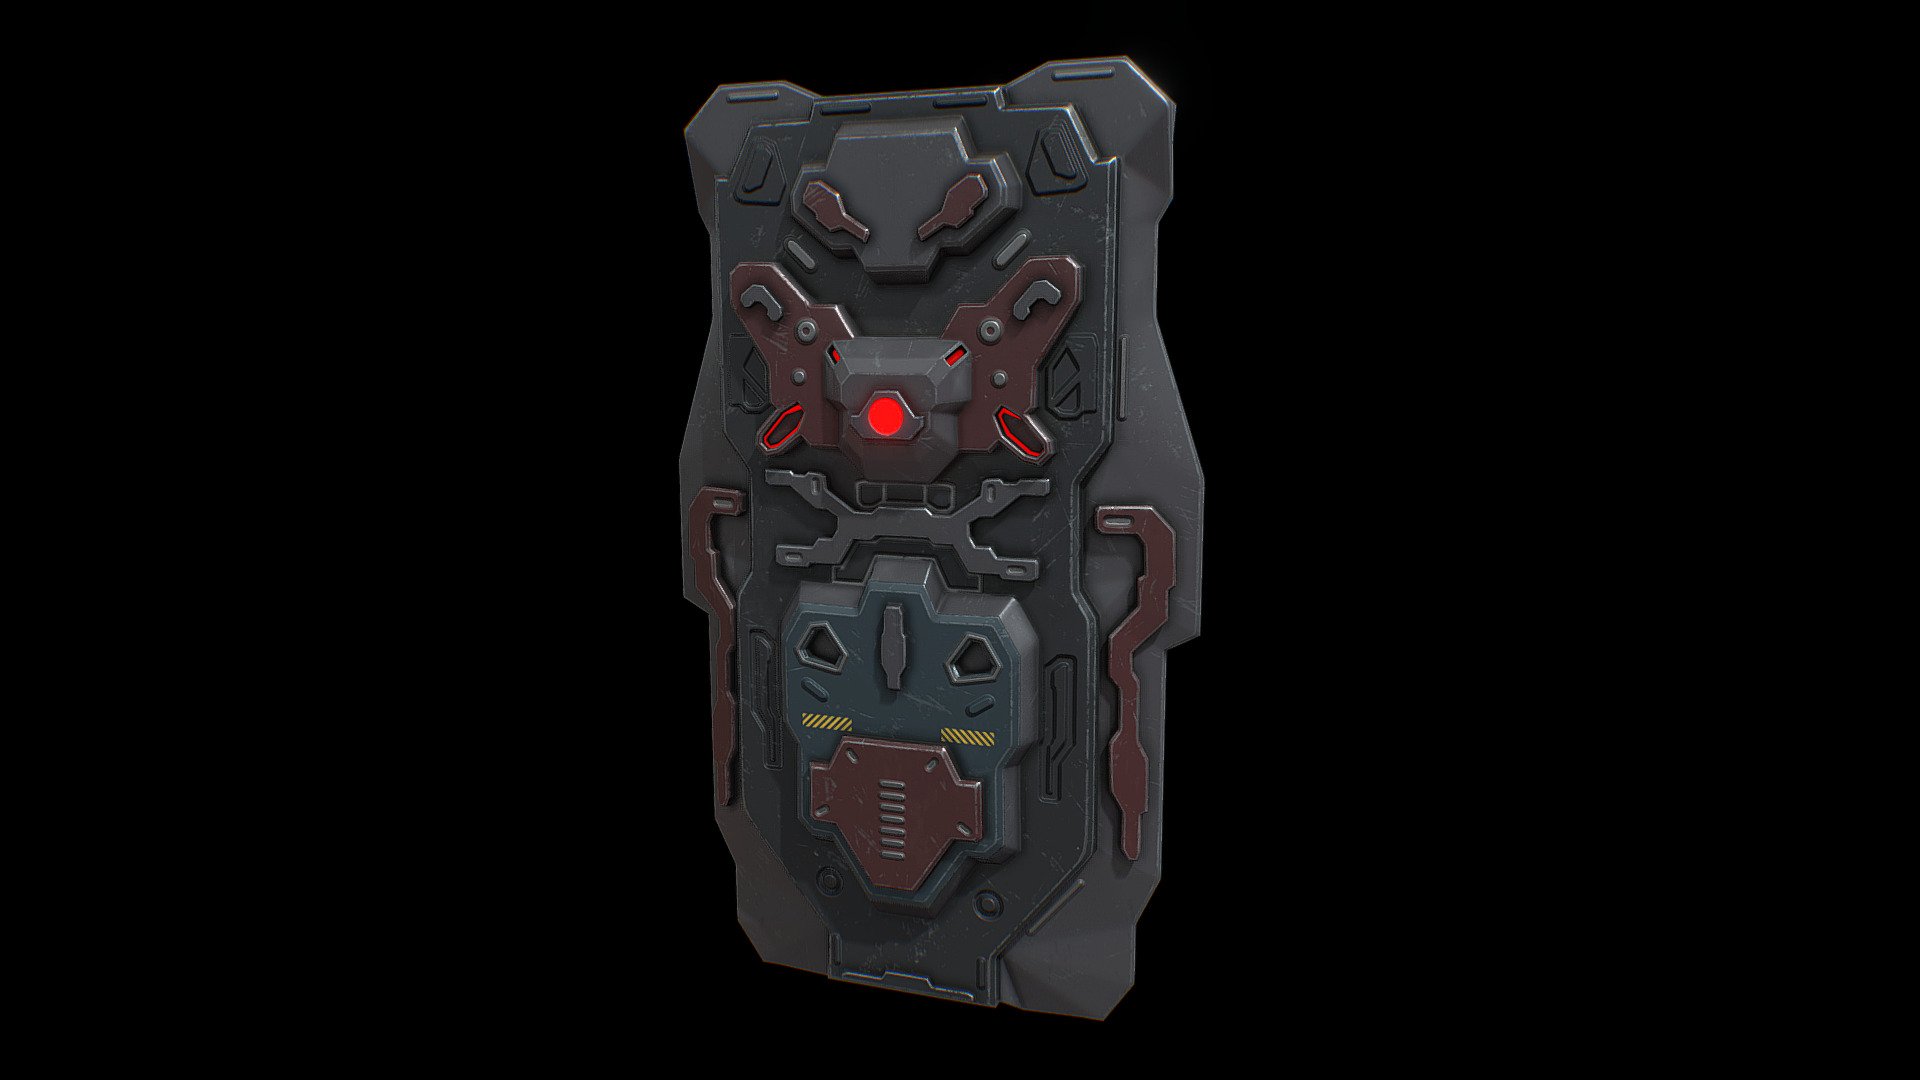 Sci fi assault shield 3d model.

4732 tris.

File formats - blend (2.91.2), fbx, obj

Ready for games and other real time applications.

PBR textures - 4096x4096 png format

Base color map,

Normal map,

Roughness map,

Metallic map ,

Ambient Occlusion map,

Emissive map,

Also included Substance painter texture maps presets for:

Unreal Engine 4,

Unity (Standart Metallic) 3d model